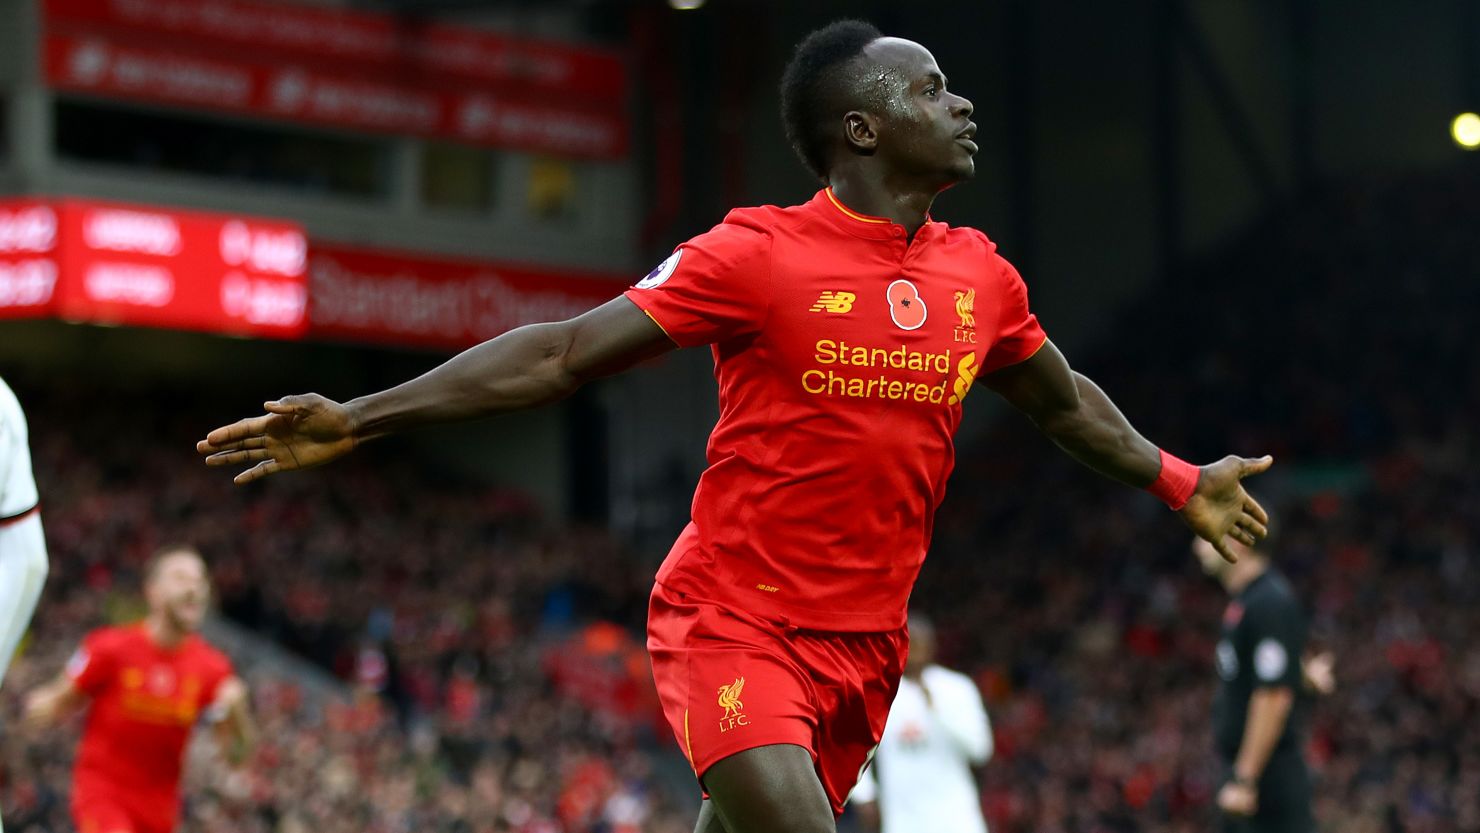 Sadio Mane of Liverpool celebrates scoring the opener against Watford as his team goes top of the English Premier League.